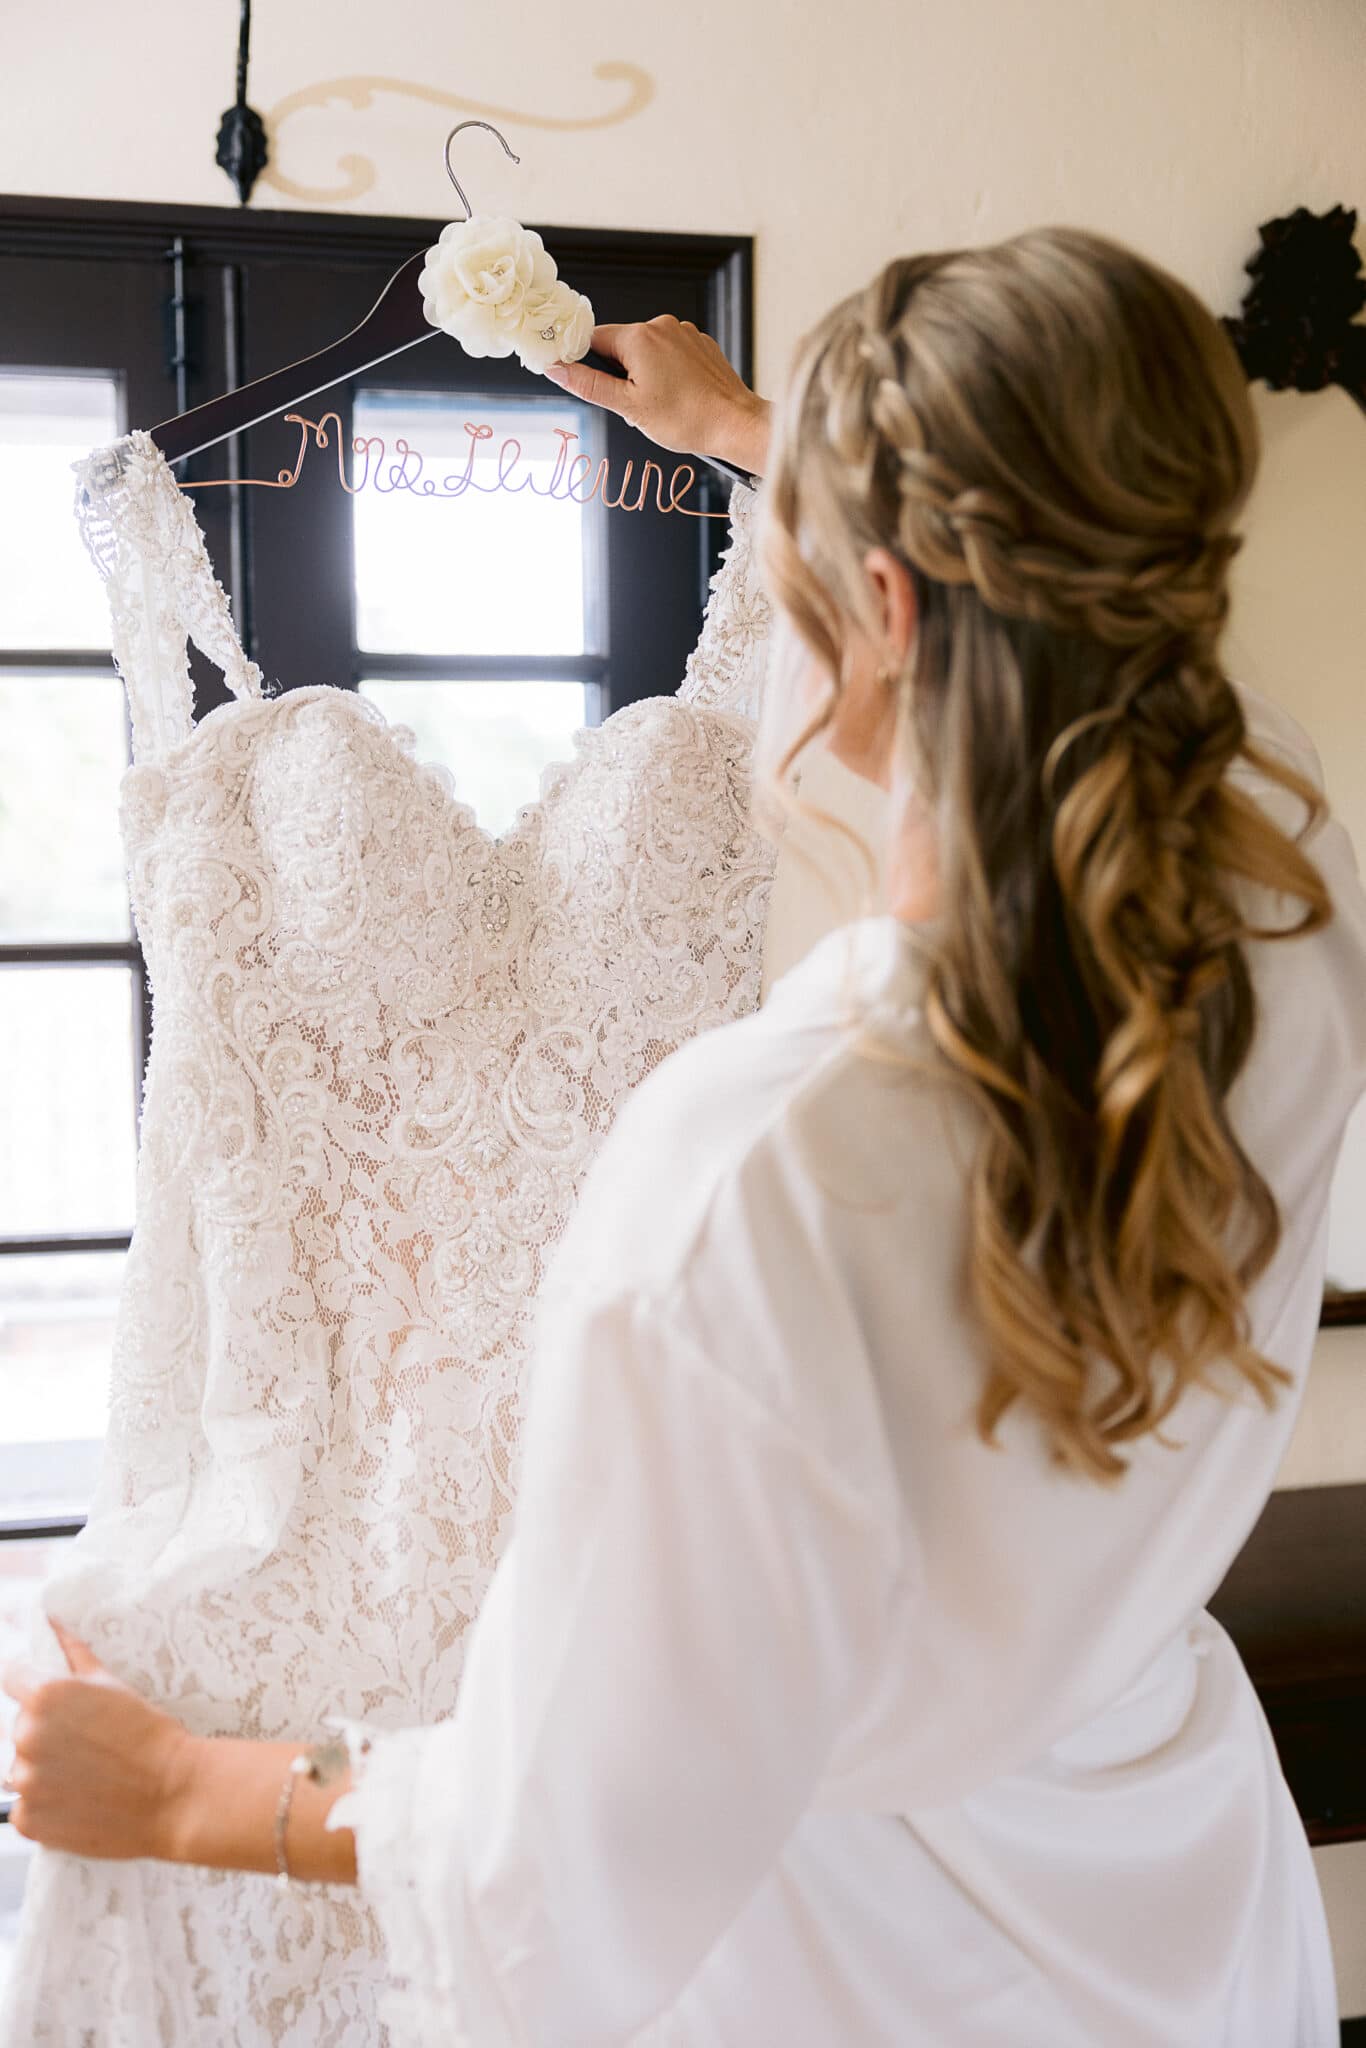 Bride facing away from the camera. Her hair is braided and down and she is taking her wedding dress off of the hanger